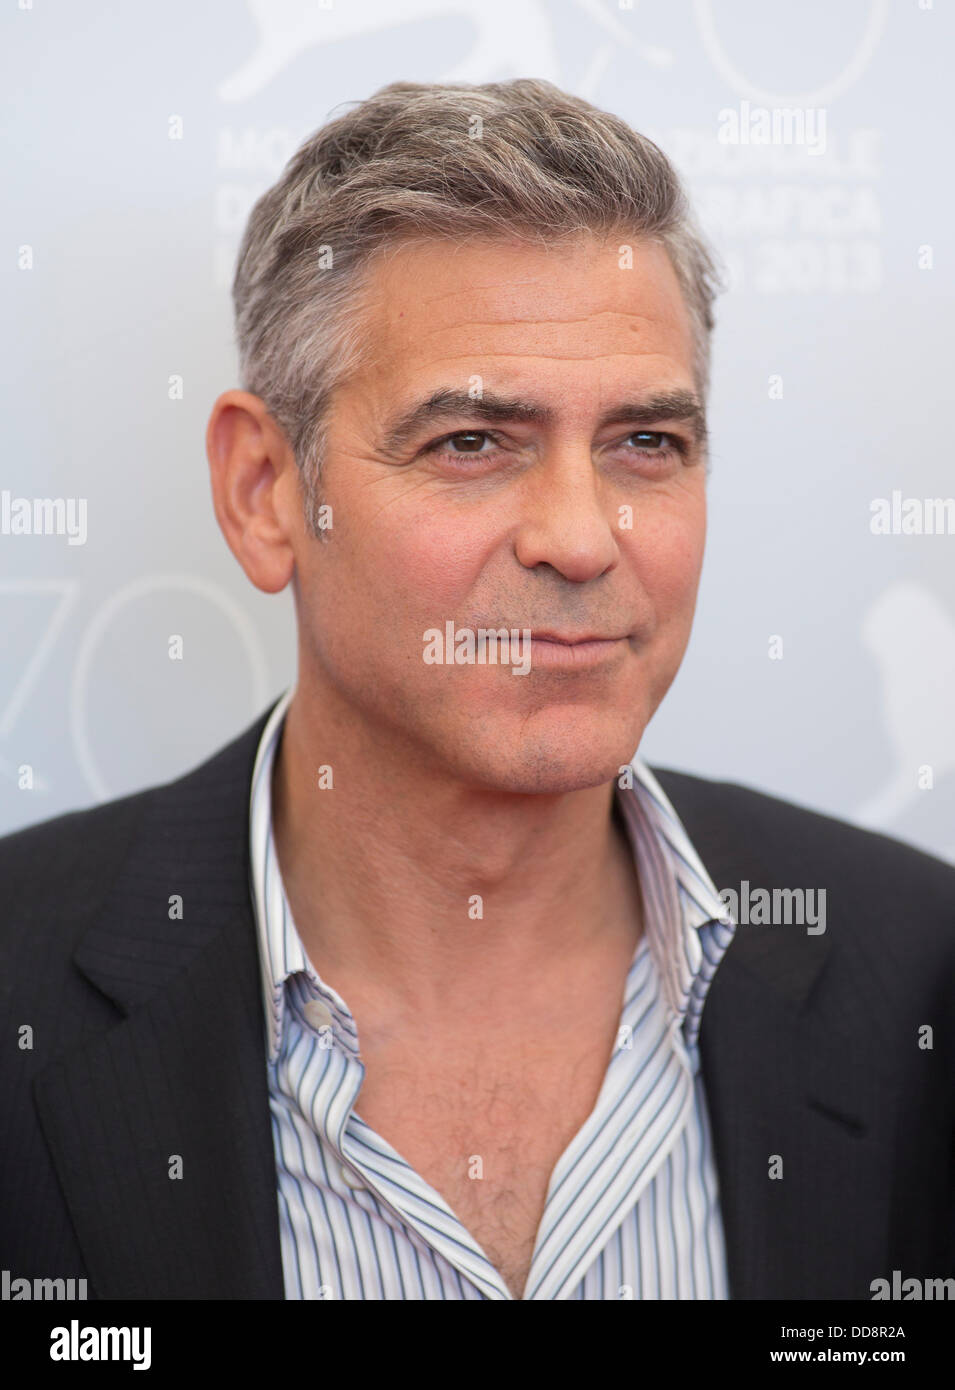 GEORGE CLOONEY GRAVITY PHOTOCALL 70TH VENICE FILM FESTIVAL LIDO VENICE  ITALY 28 August 2013 Stock Photo